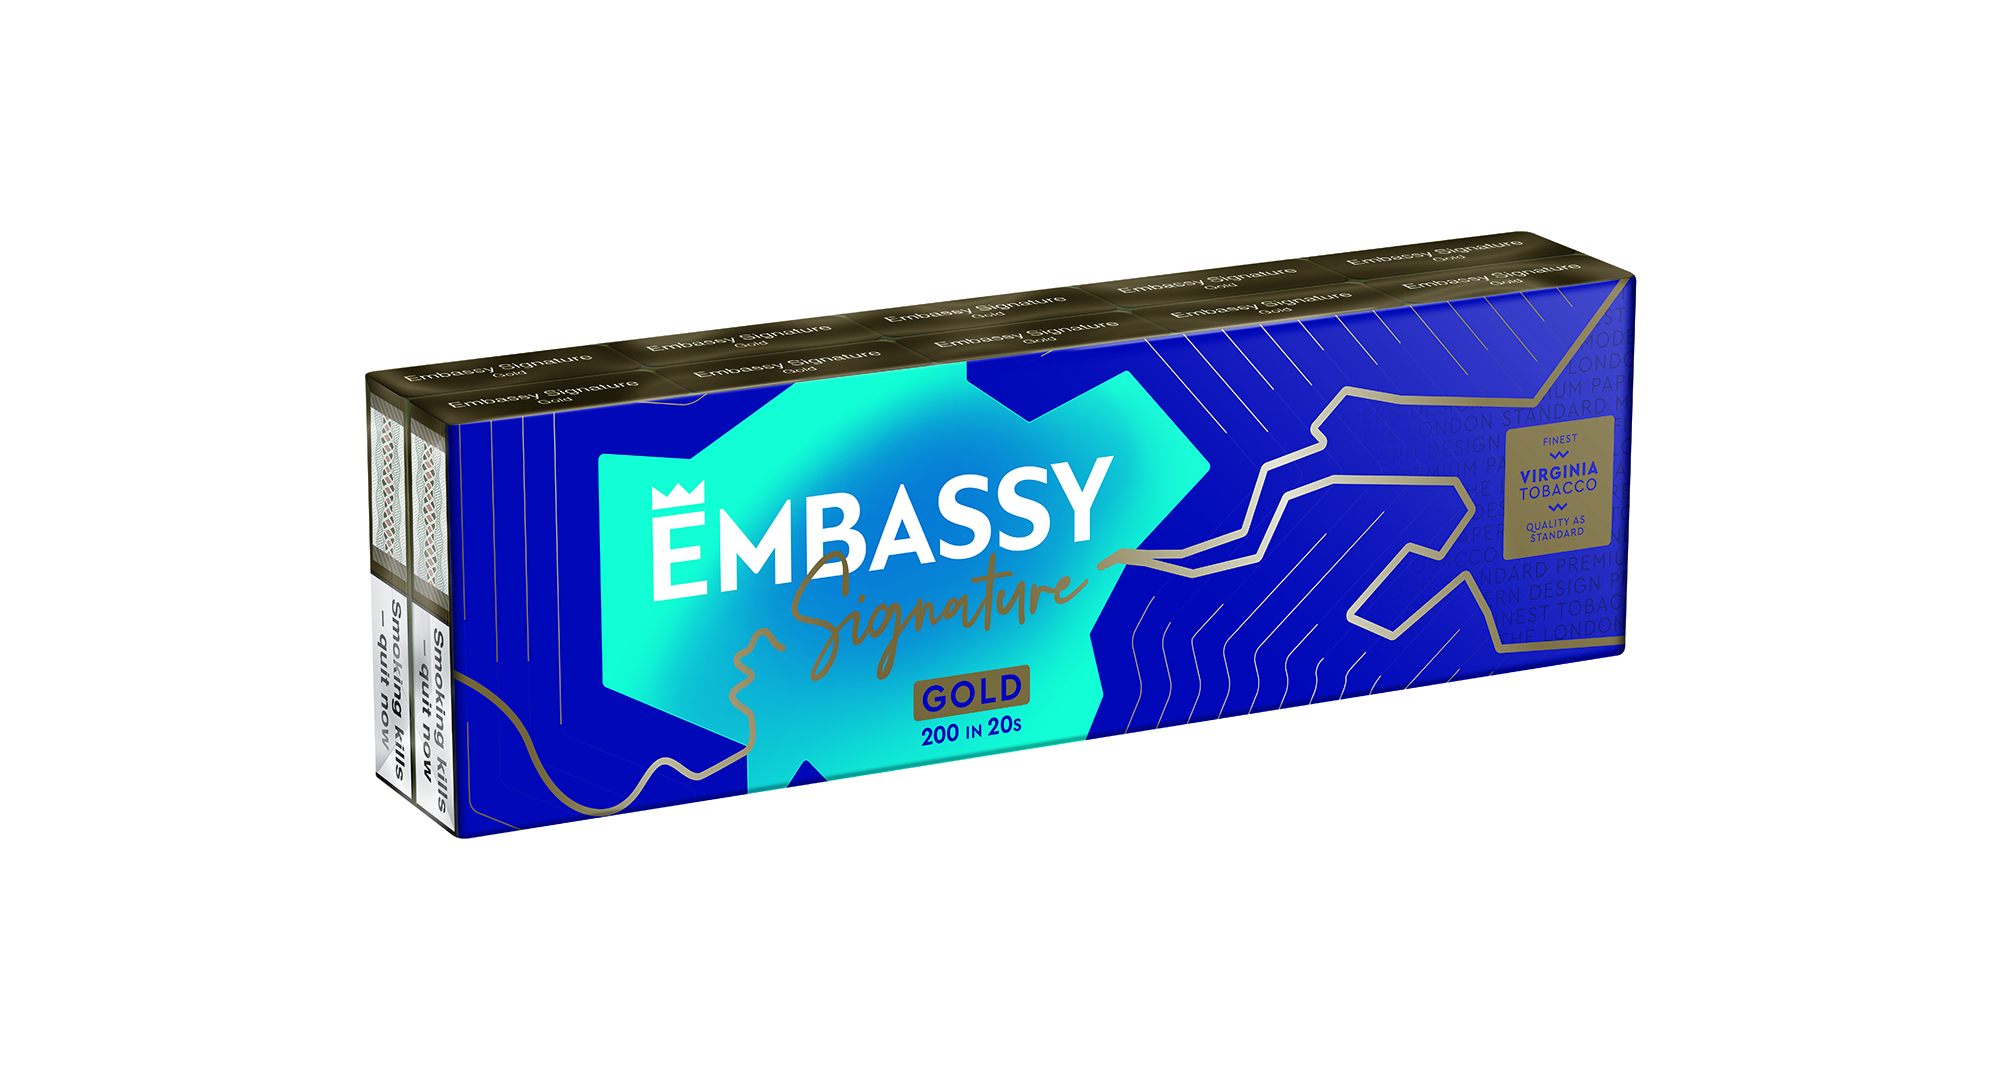 Imperial Tobacco Launches Enhanced Embassy Signature Silver Edition